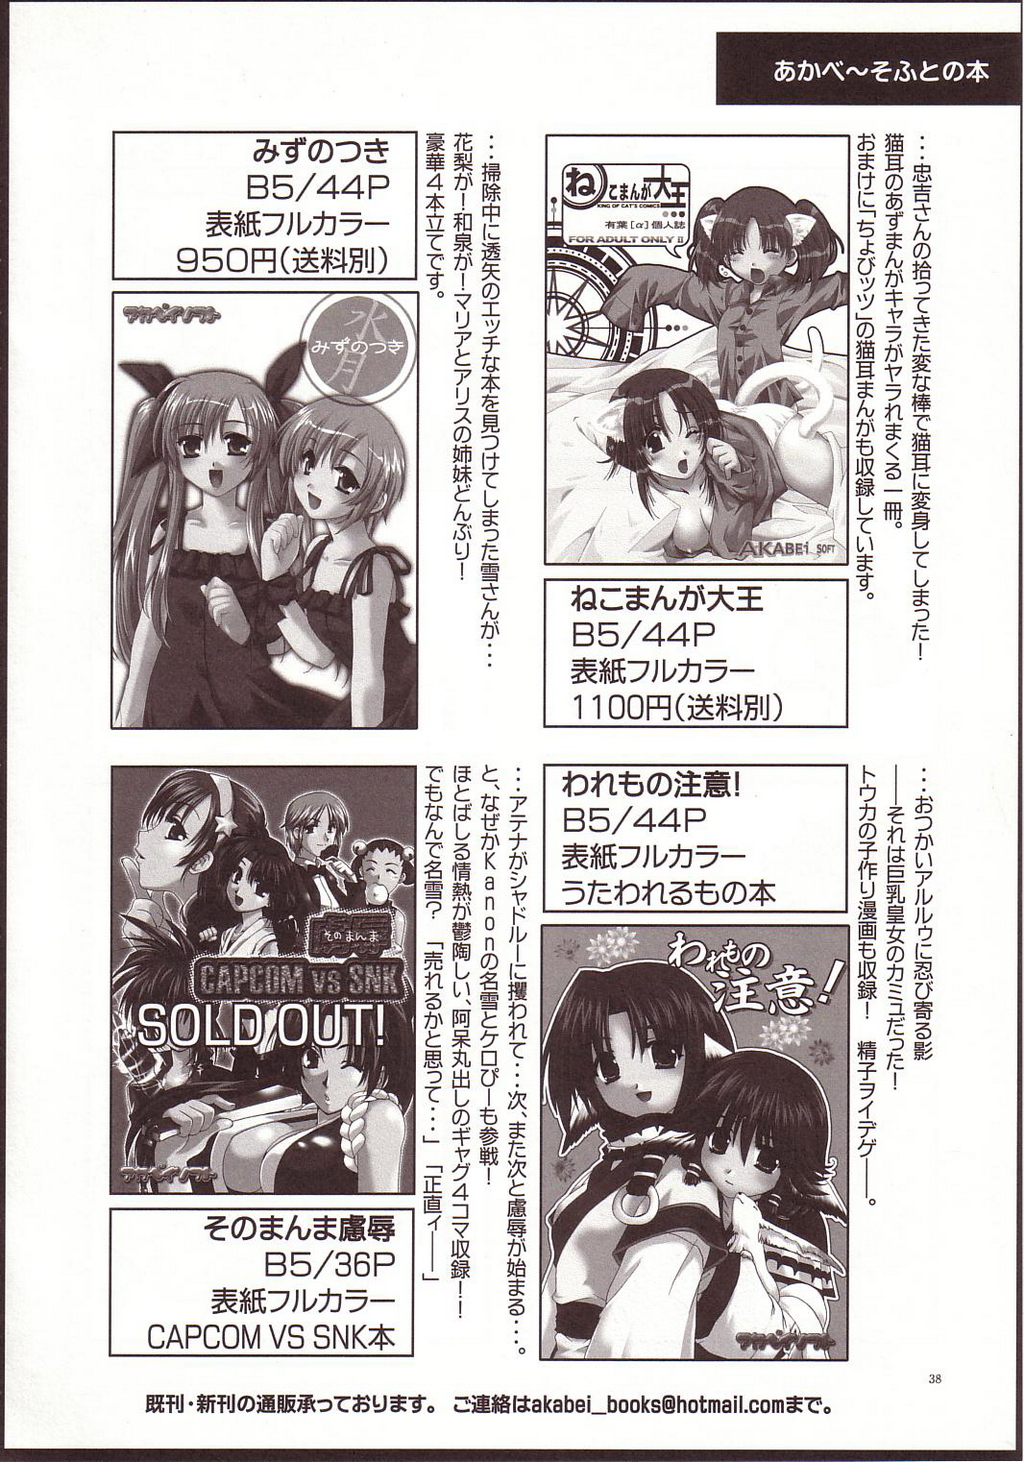 [AKABEi SOFT (Alpha)] Aishitai I WANT TO LOVE (Mobile Suit Gundam Char's Counterattack) page 37 full